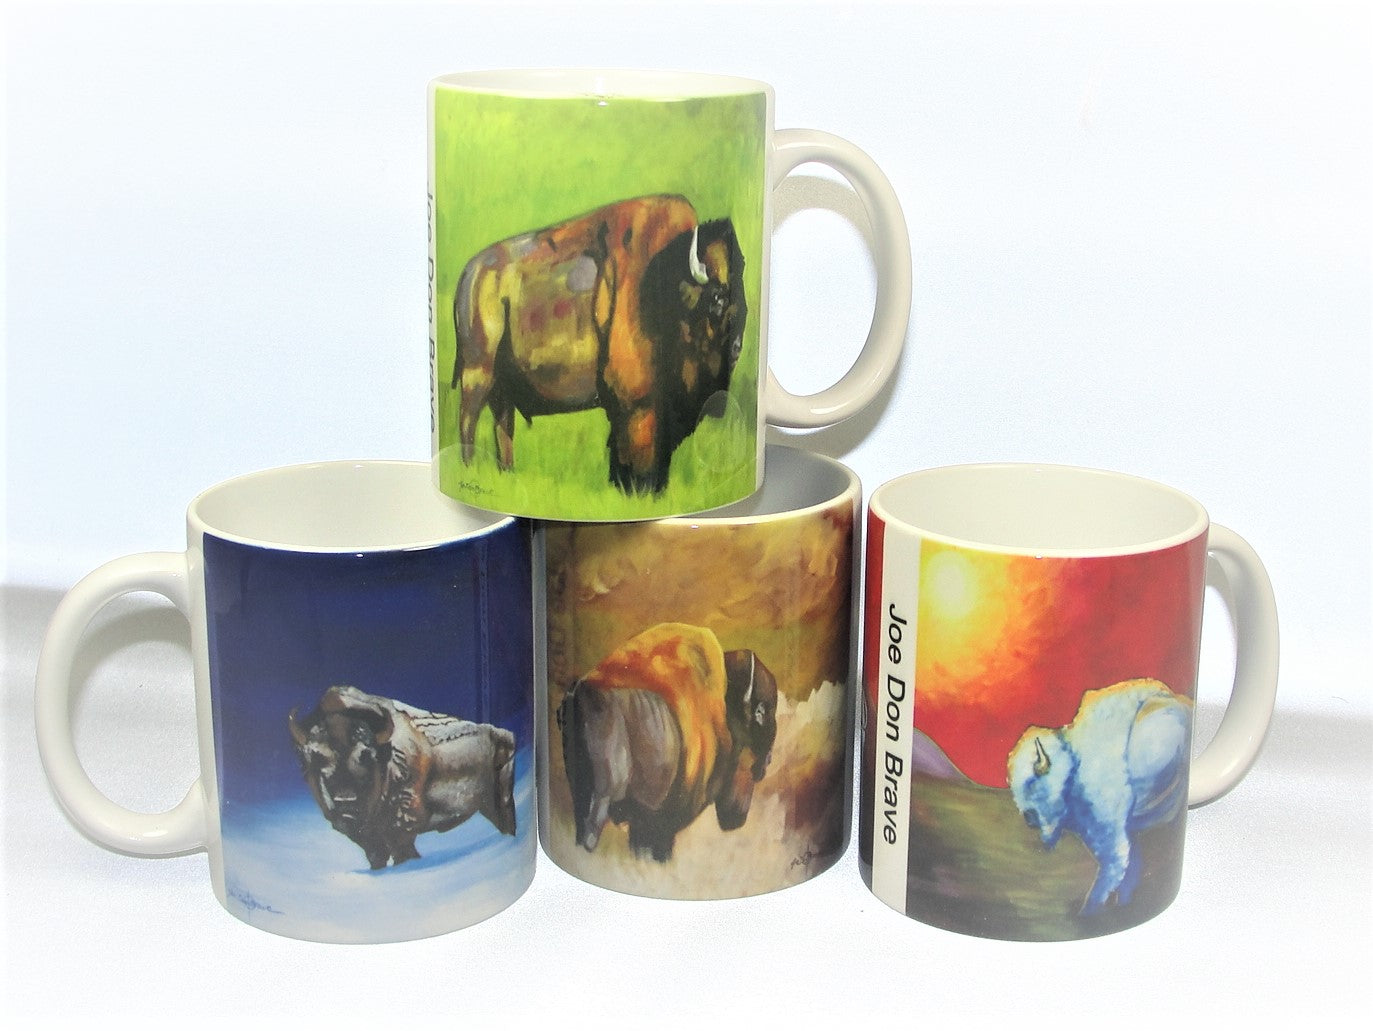 Variety Mug Sets! Selection of 4 Qty in 2 sizes; Bison/Buffalo Mugs; Variety Pack #1